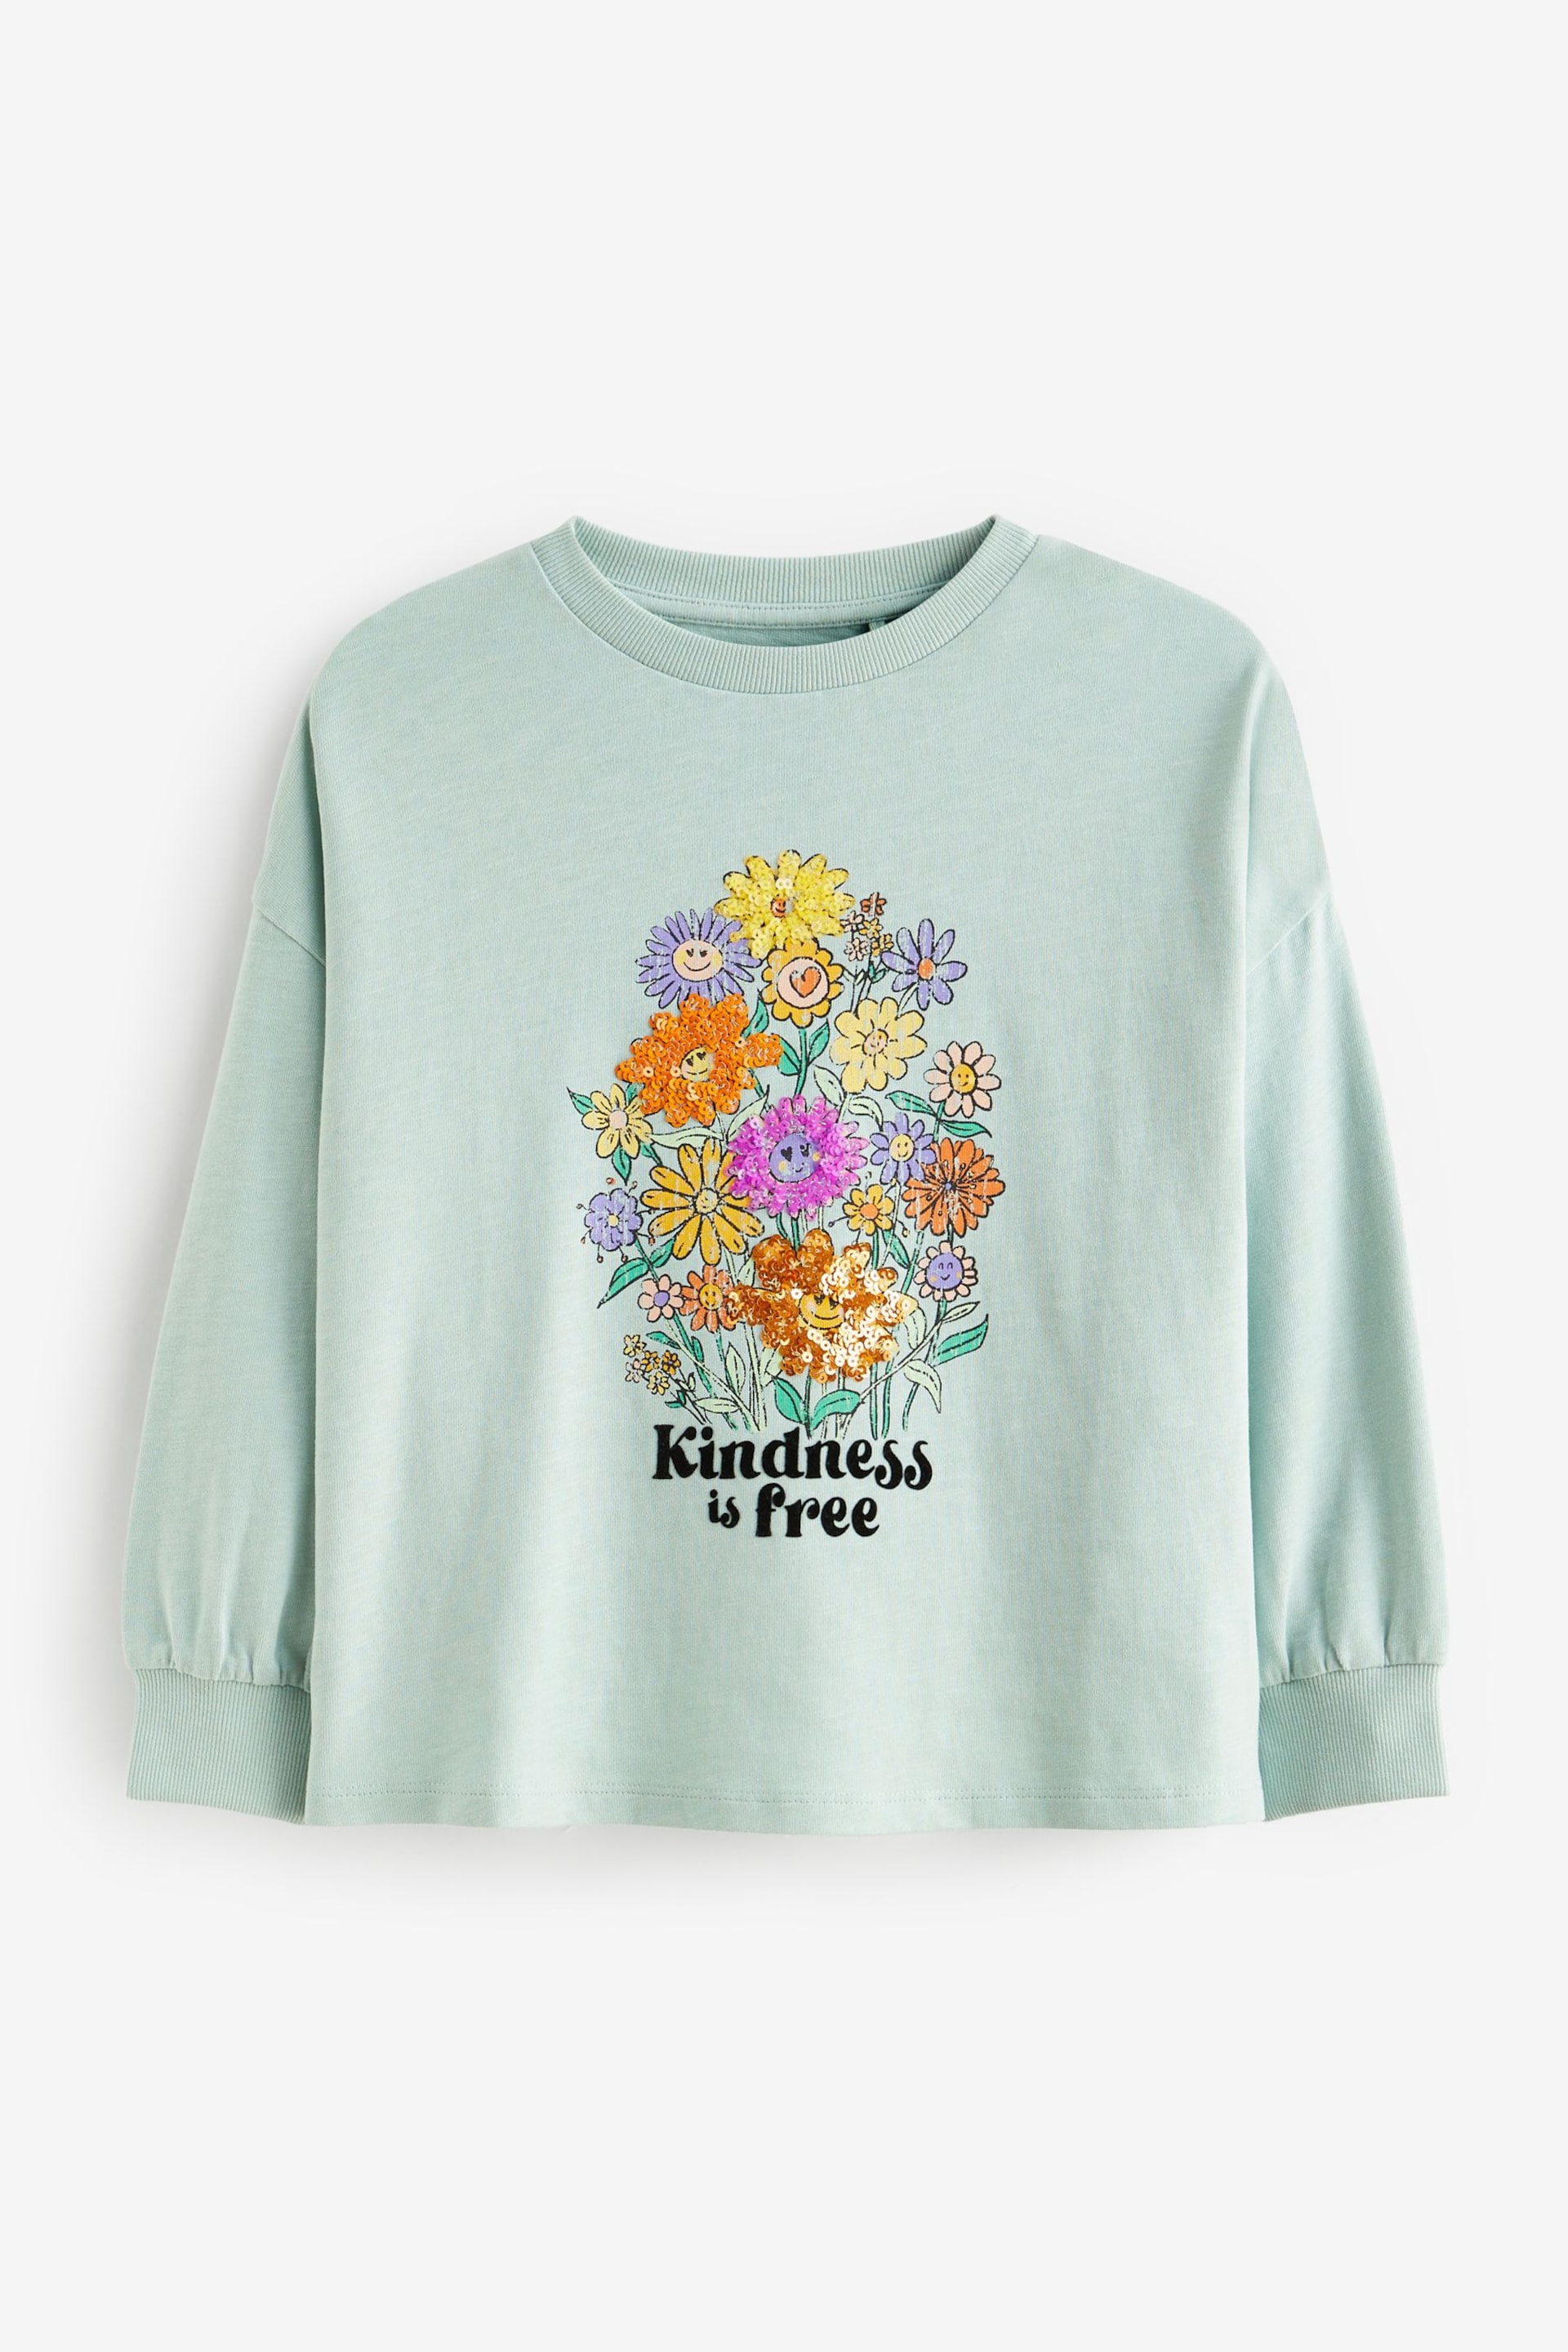 Teal Blue Sequin Flowers Long Sleeve T-Shirt (3-16yrs) - Image 6 of 8